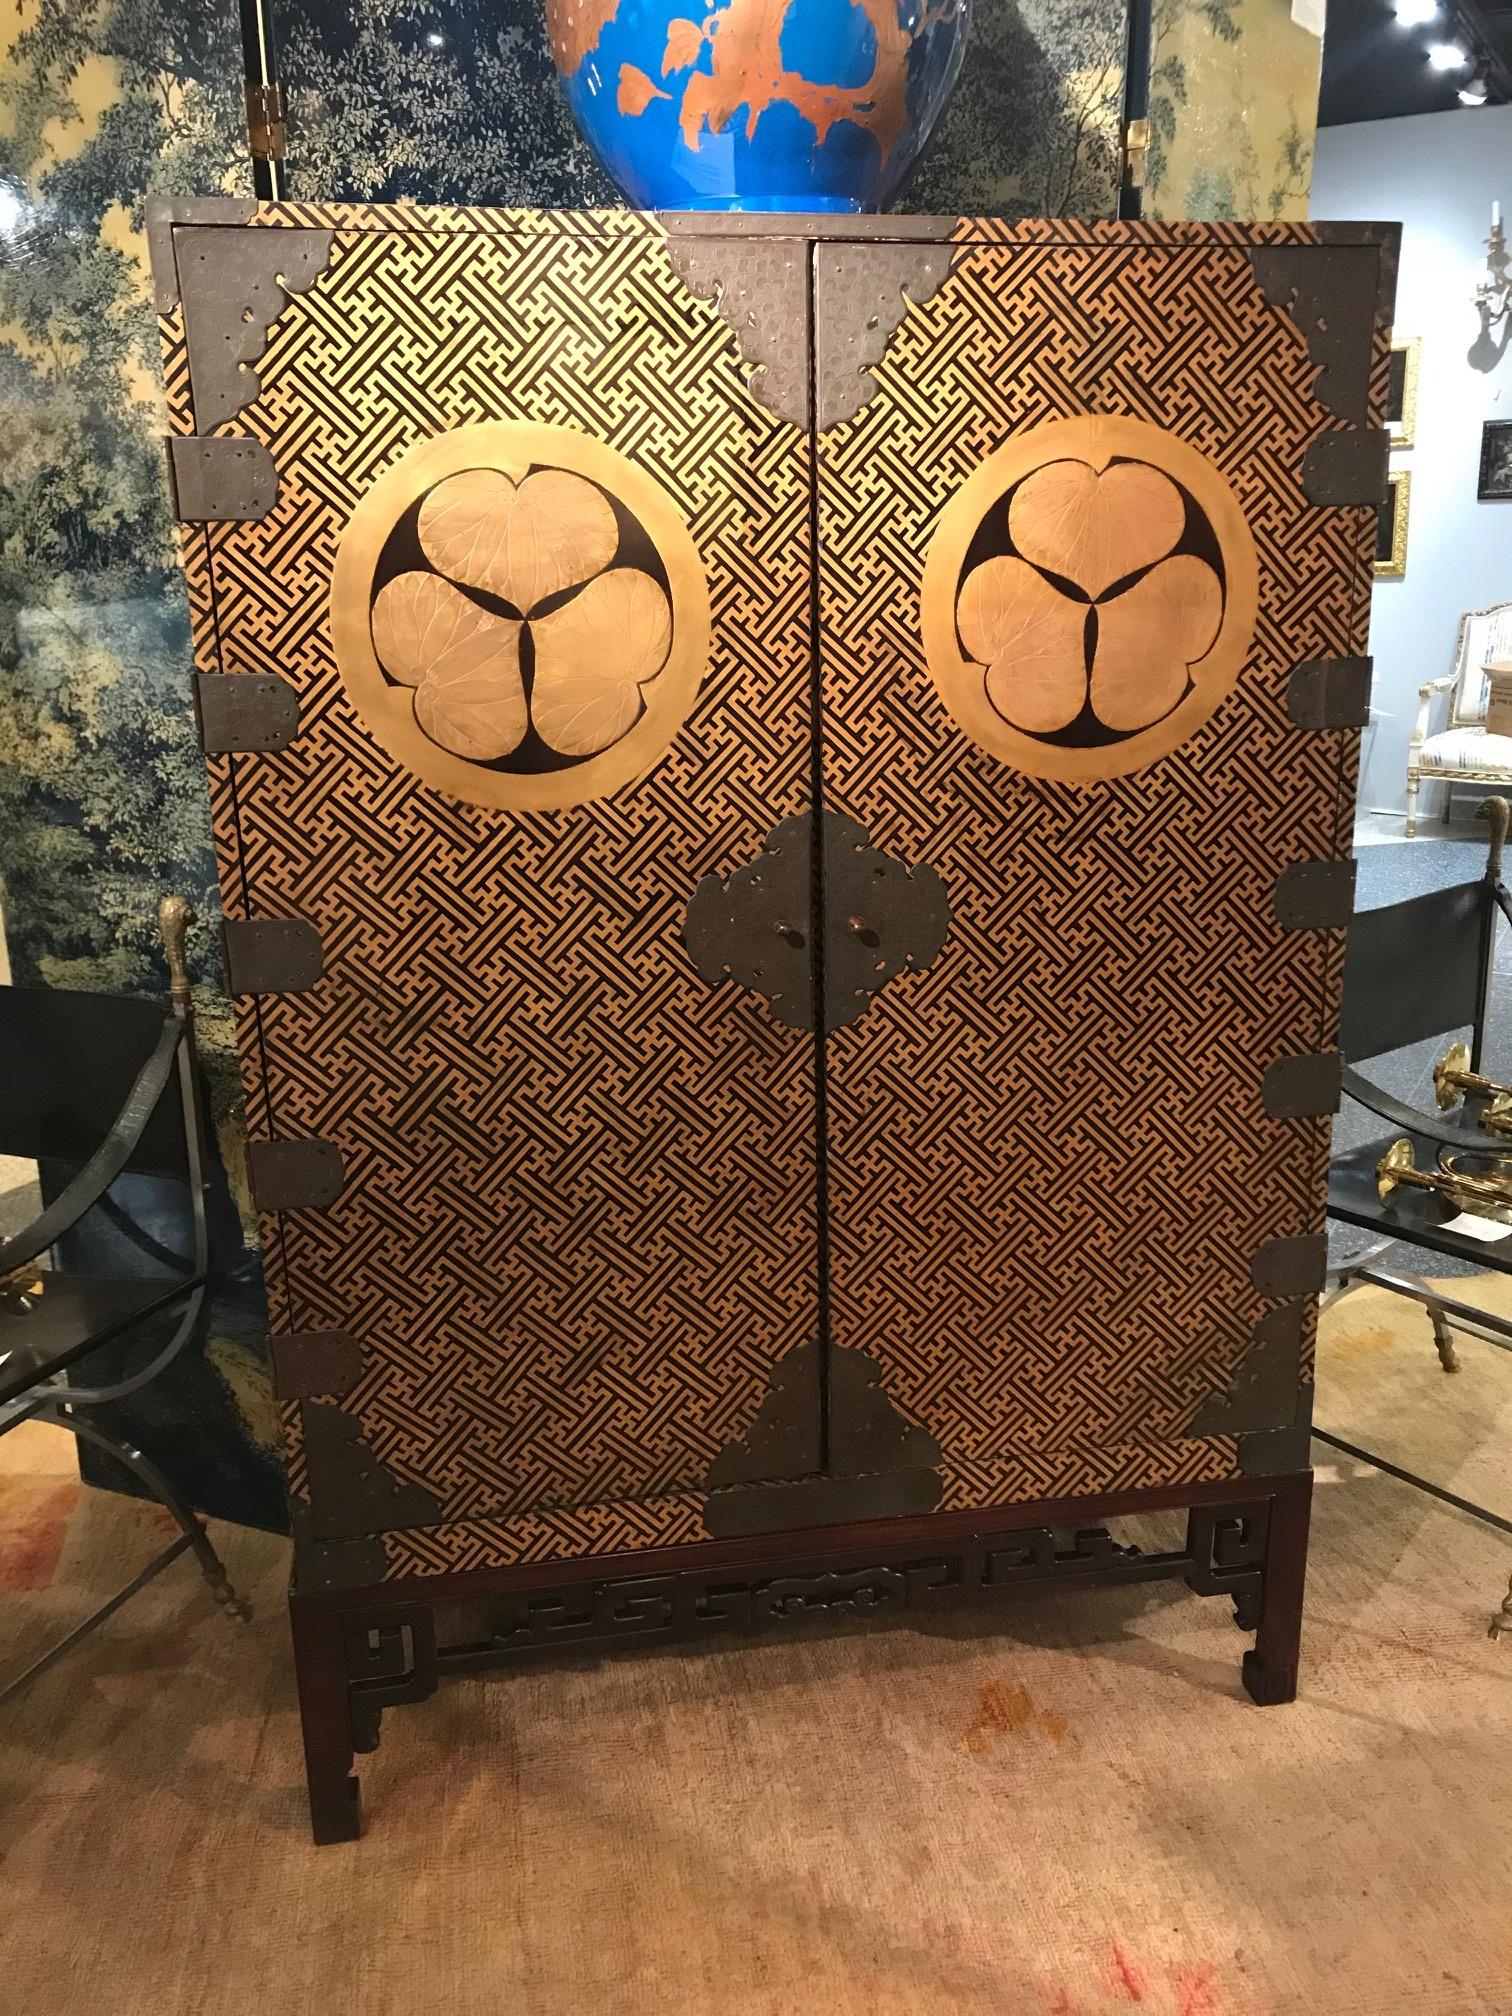 Rare lacquered wood two-door cabinet beautifully decorated with gold “hiramaki” decoration on a black lacquered geometric pattern bearing the Tokugawa family crest. Fitted with engraved iron hinges and mounts and the interior includes five drawers